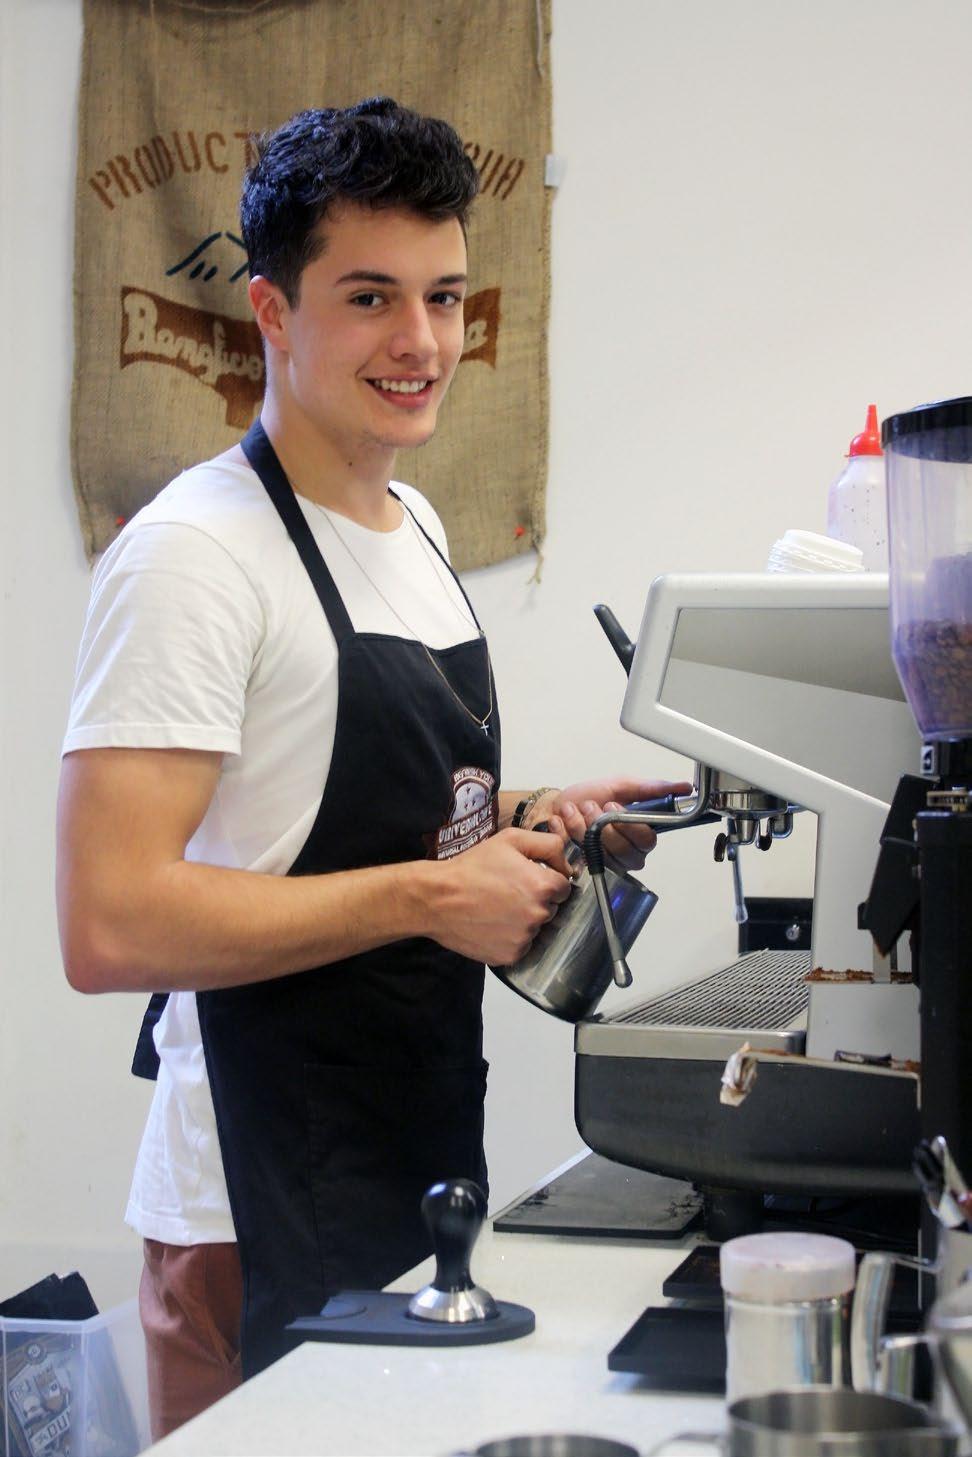 practice for a job interview - Understand different types of grinders and espresso machines - Learn how to clean and maintain espresso machines Optional Cafe Internship 3 weeks of